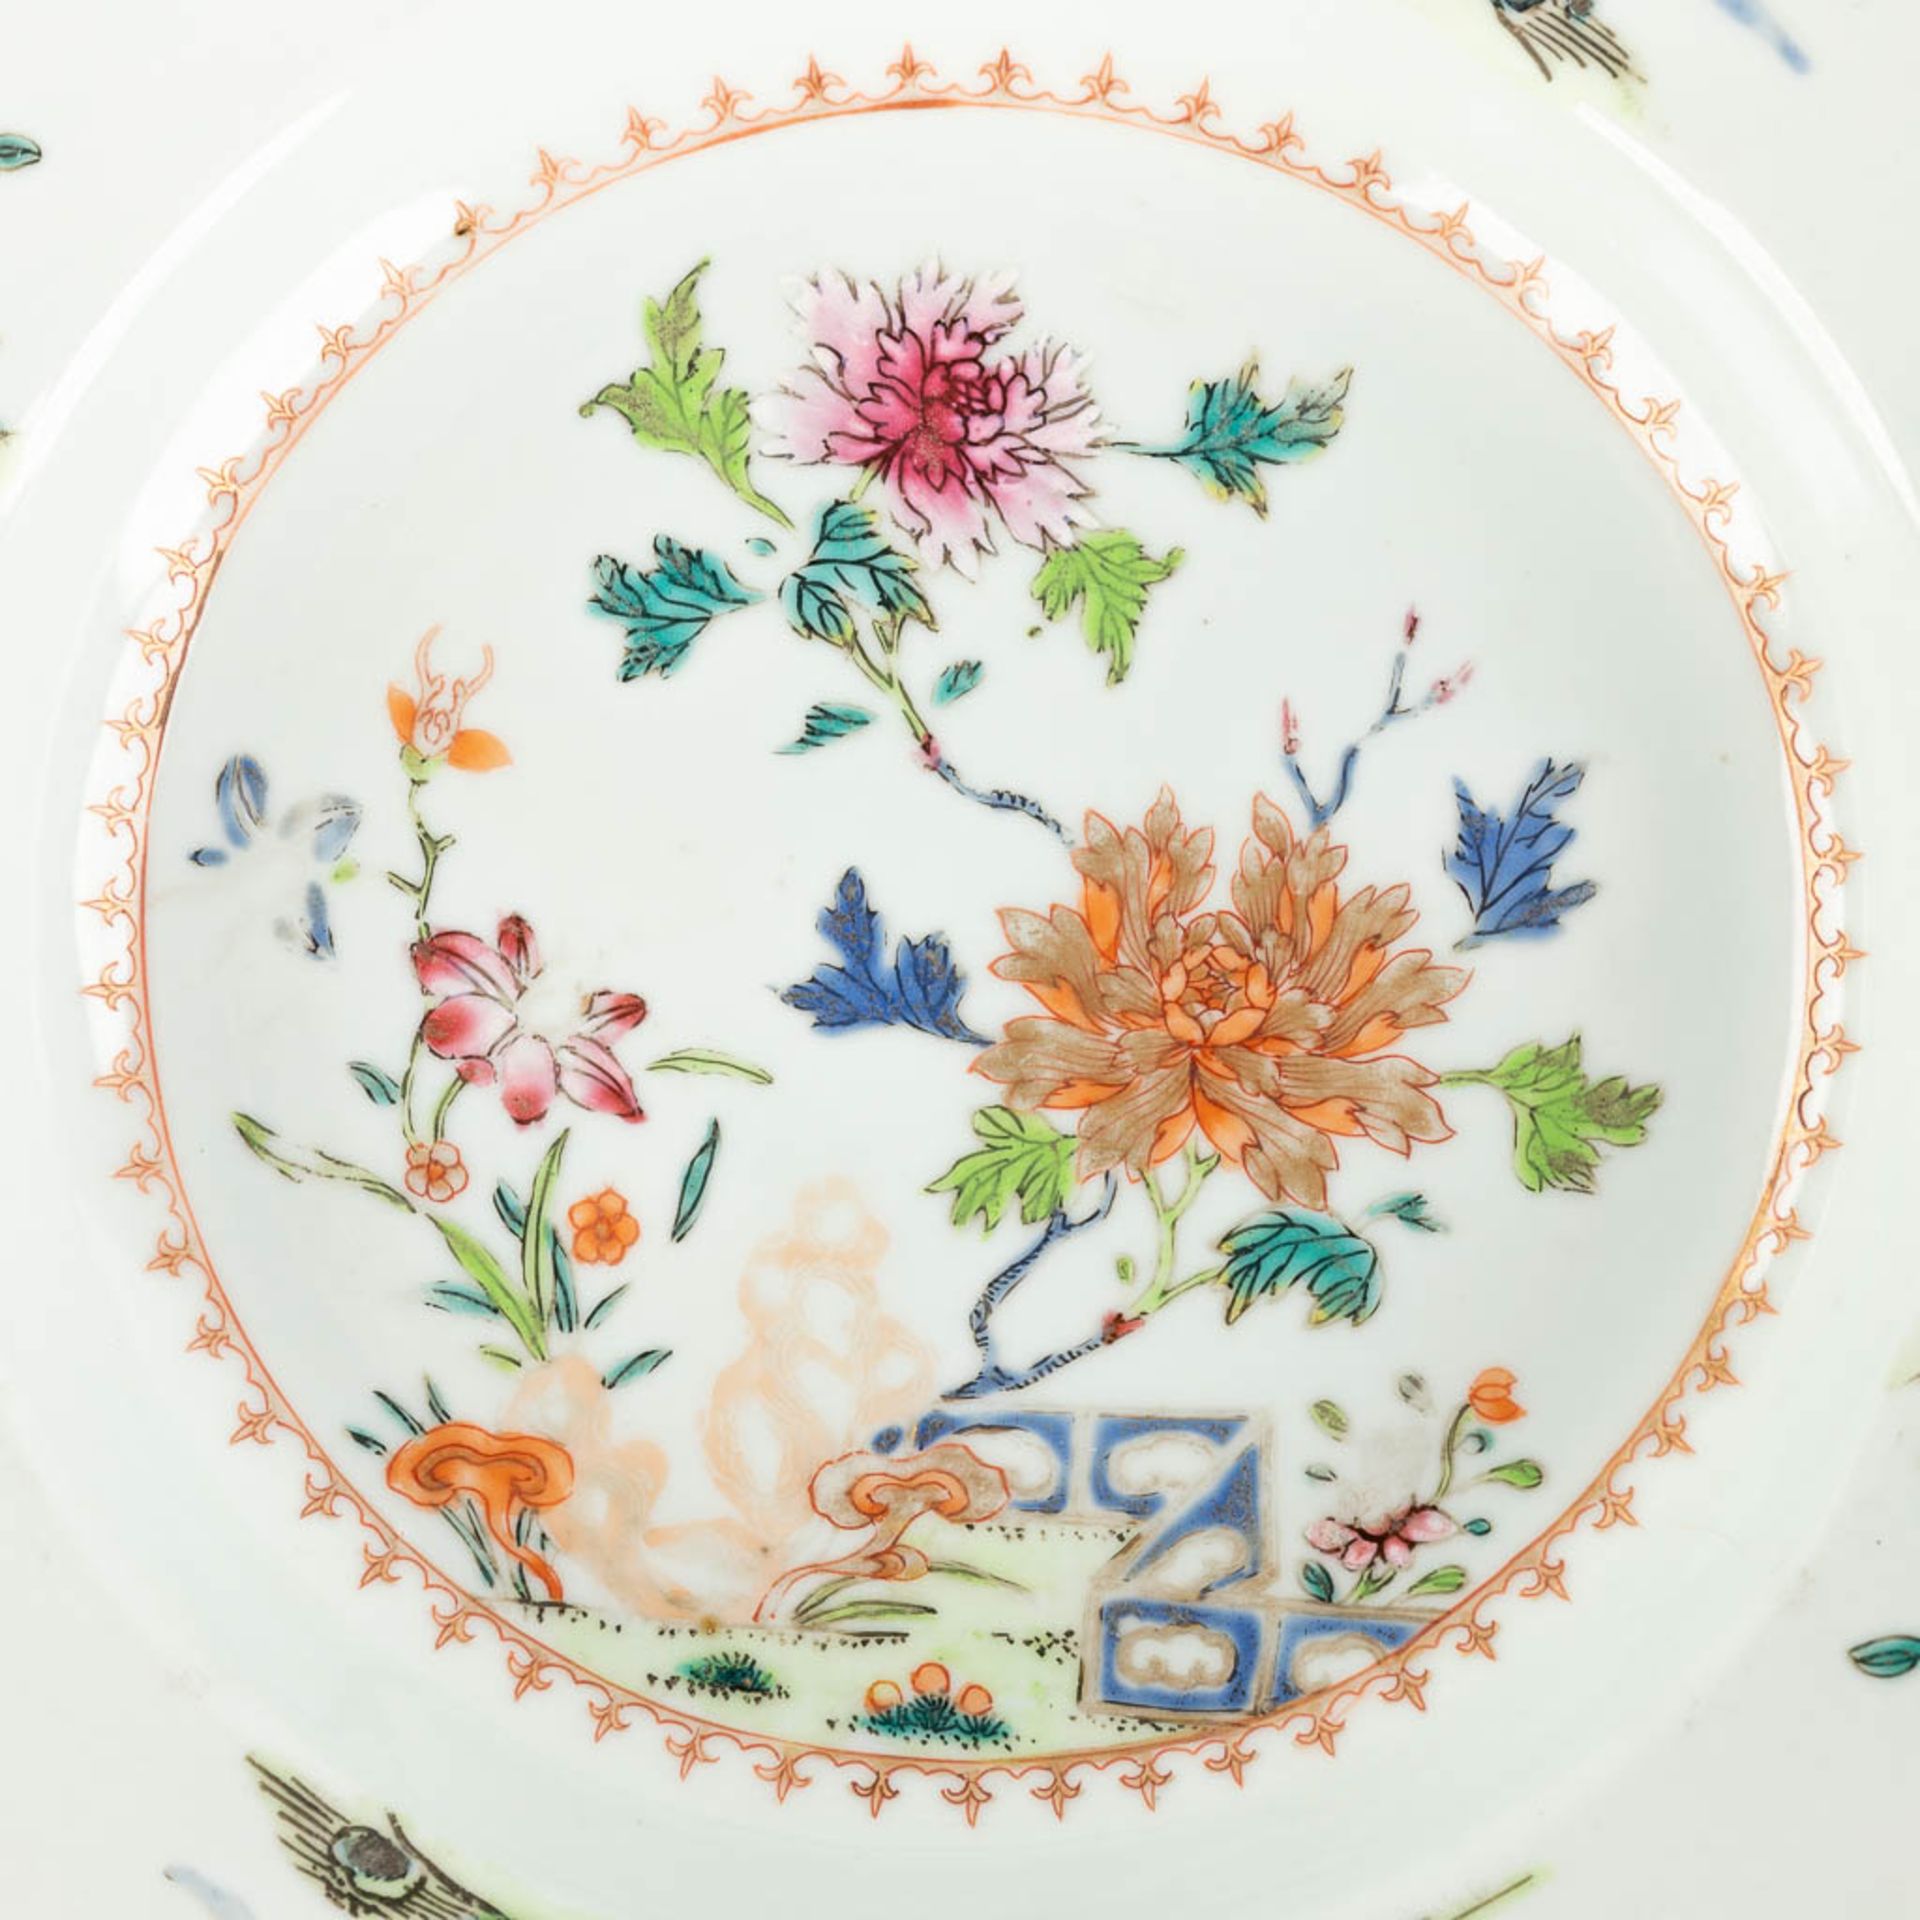 Three Chinese Famille Rose plates with a floral decor. 19th C. (D:22,5 cm) - Image 5 of 11